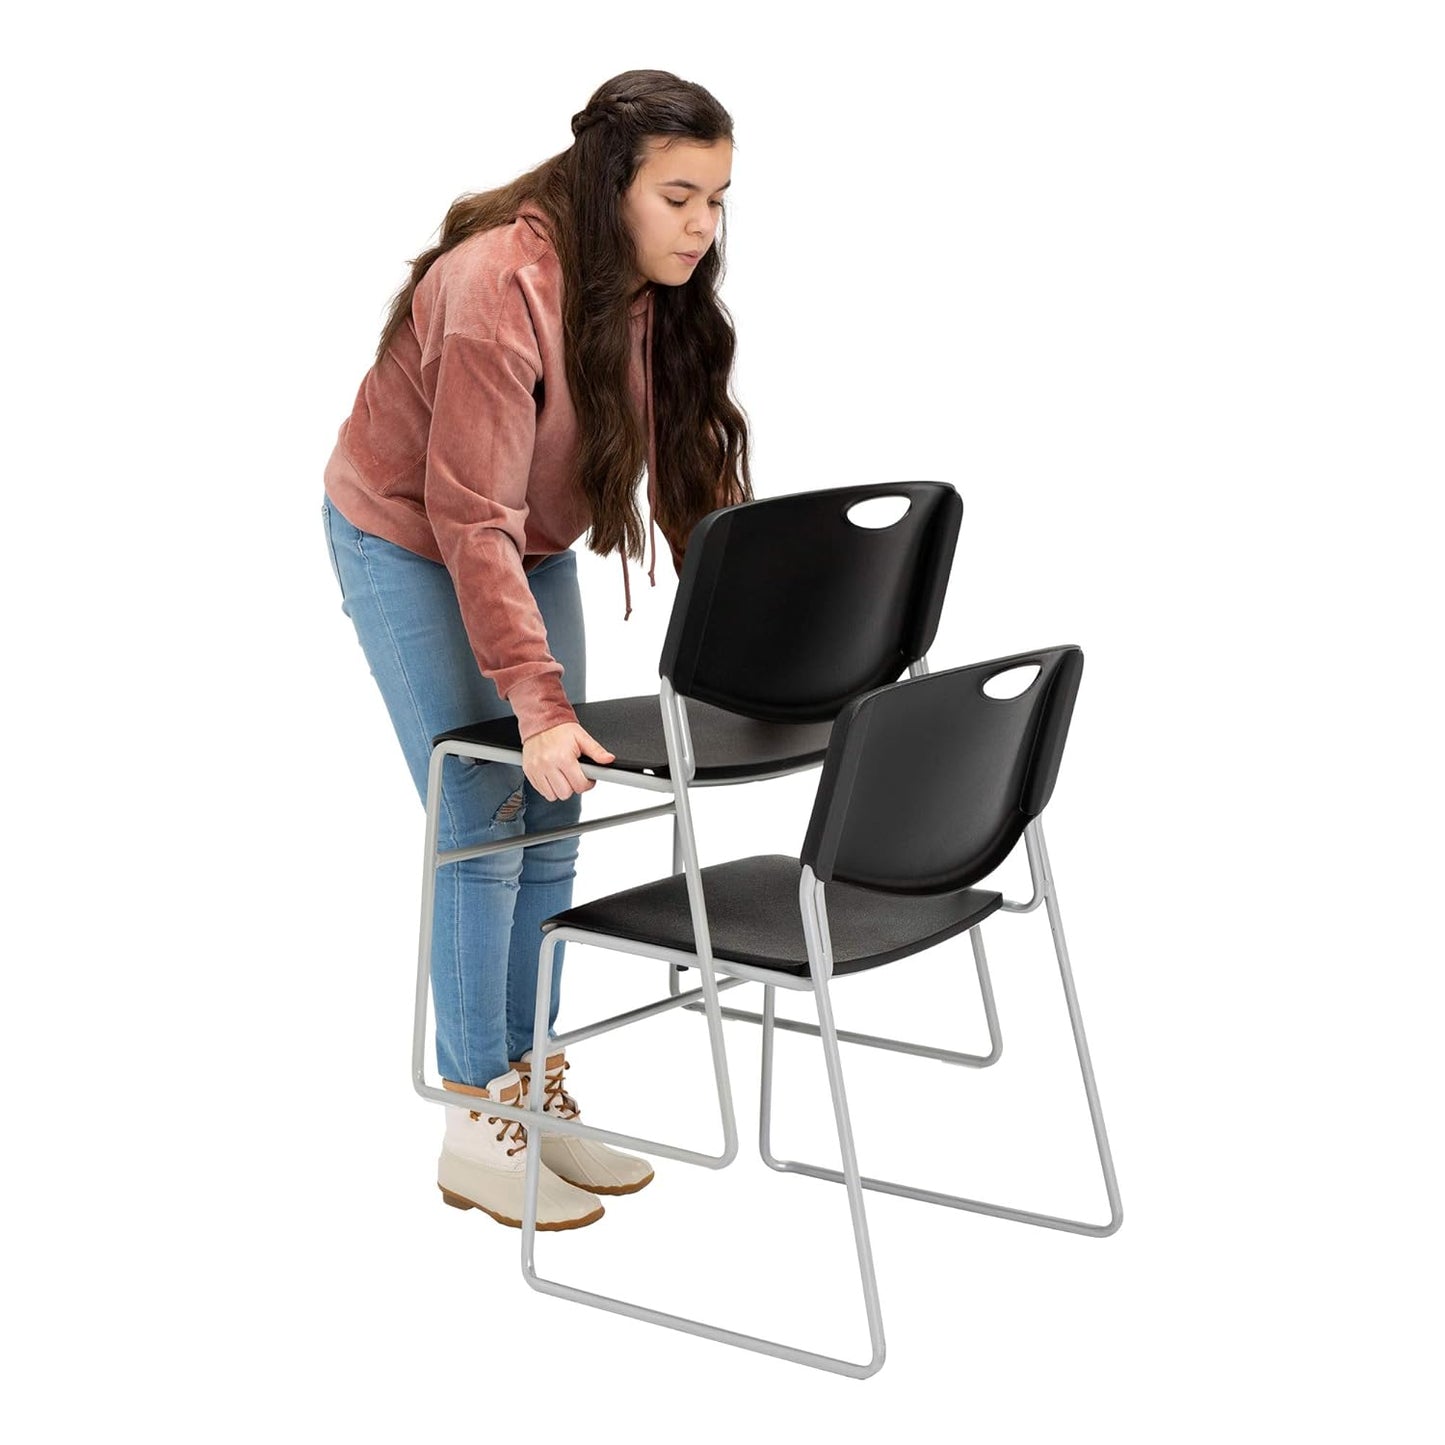 Heavy-Duty Plastic Stacking Chairs with Contoured Backs, Stackable Office and Waiting Room Chairs, Set of 4, Charcoal